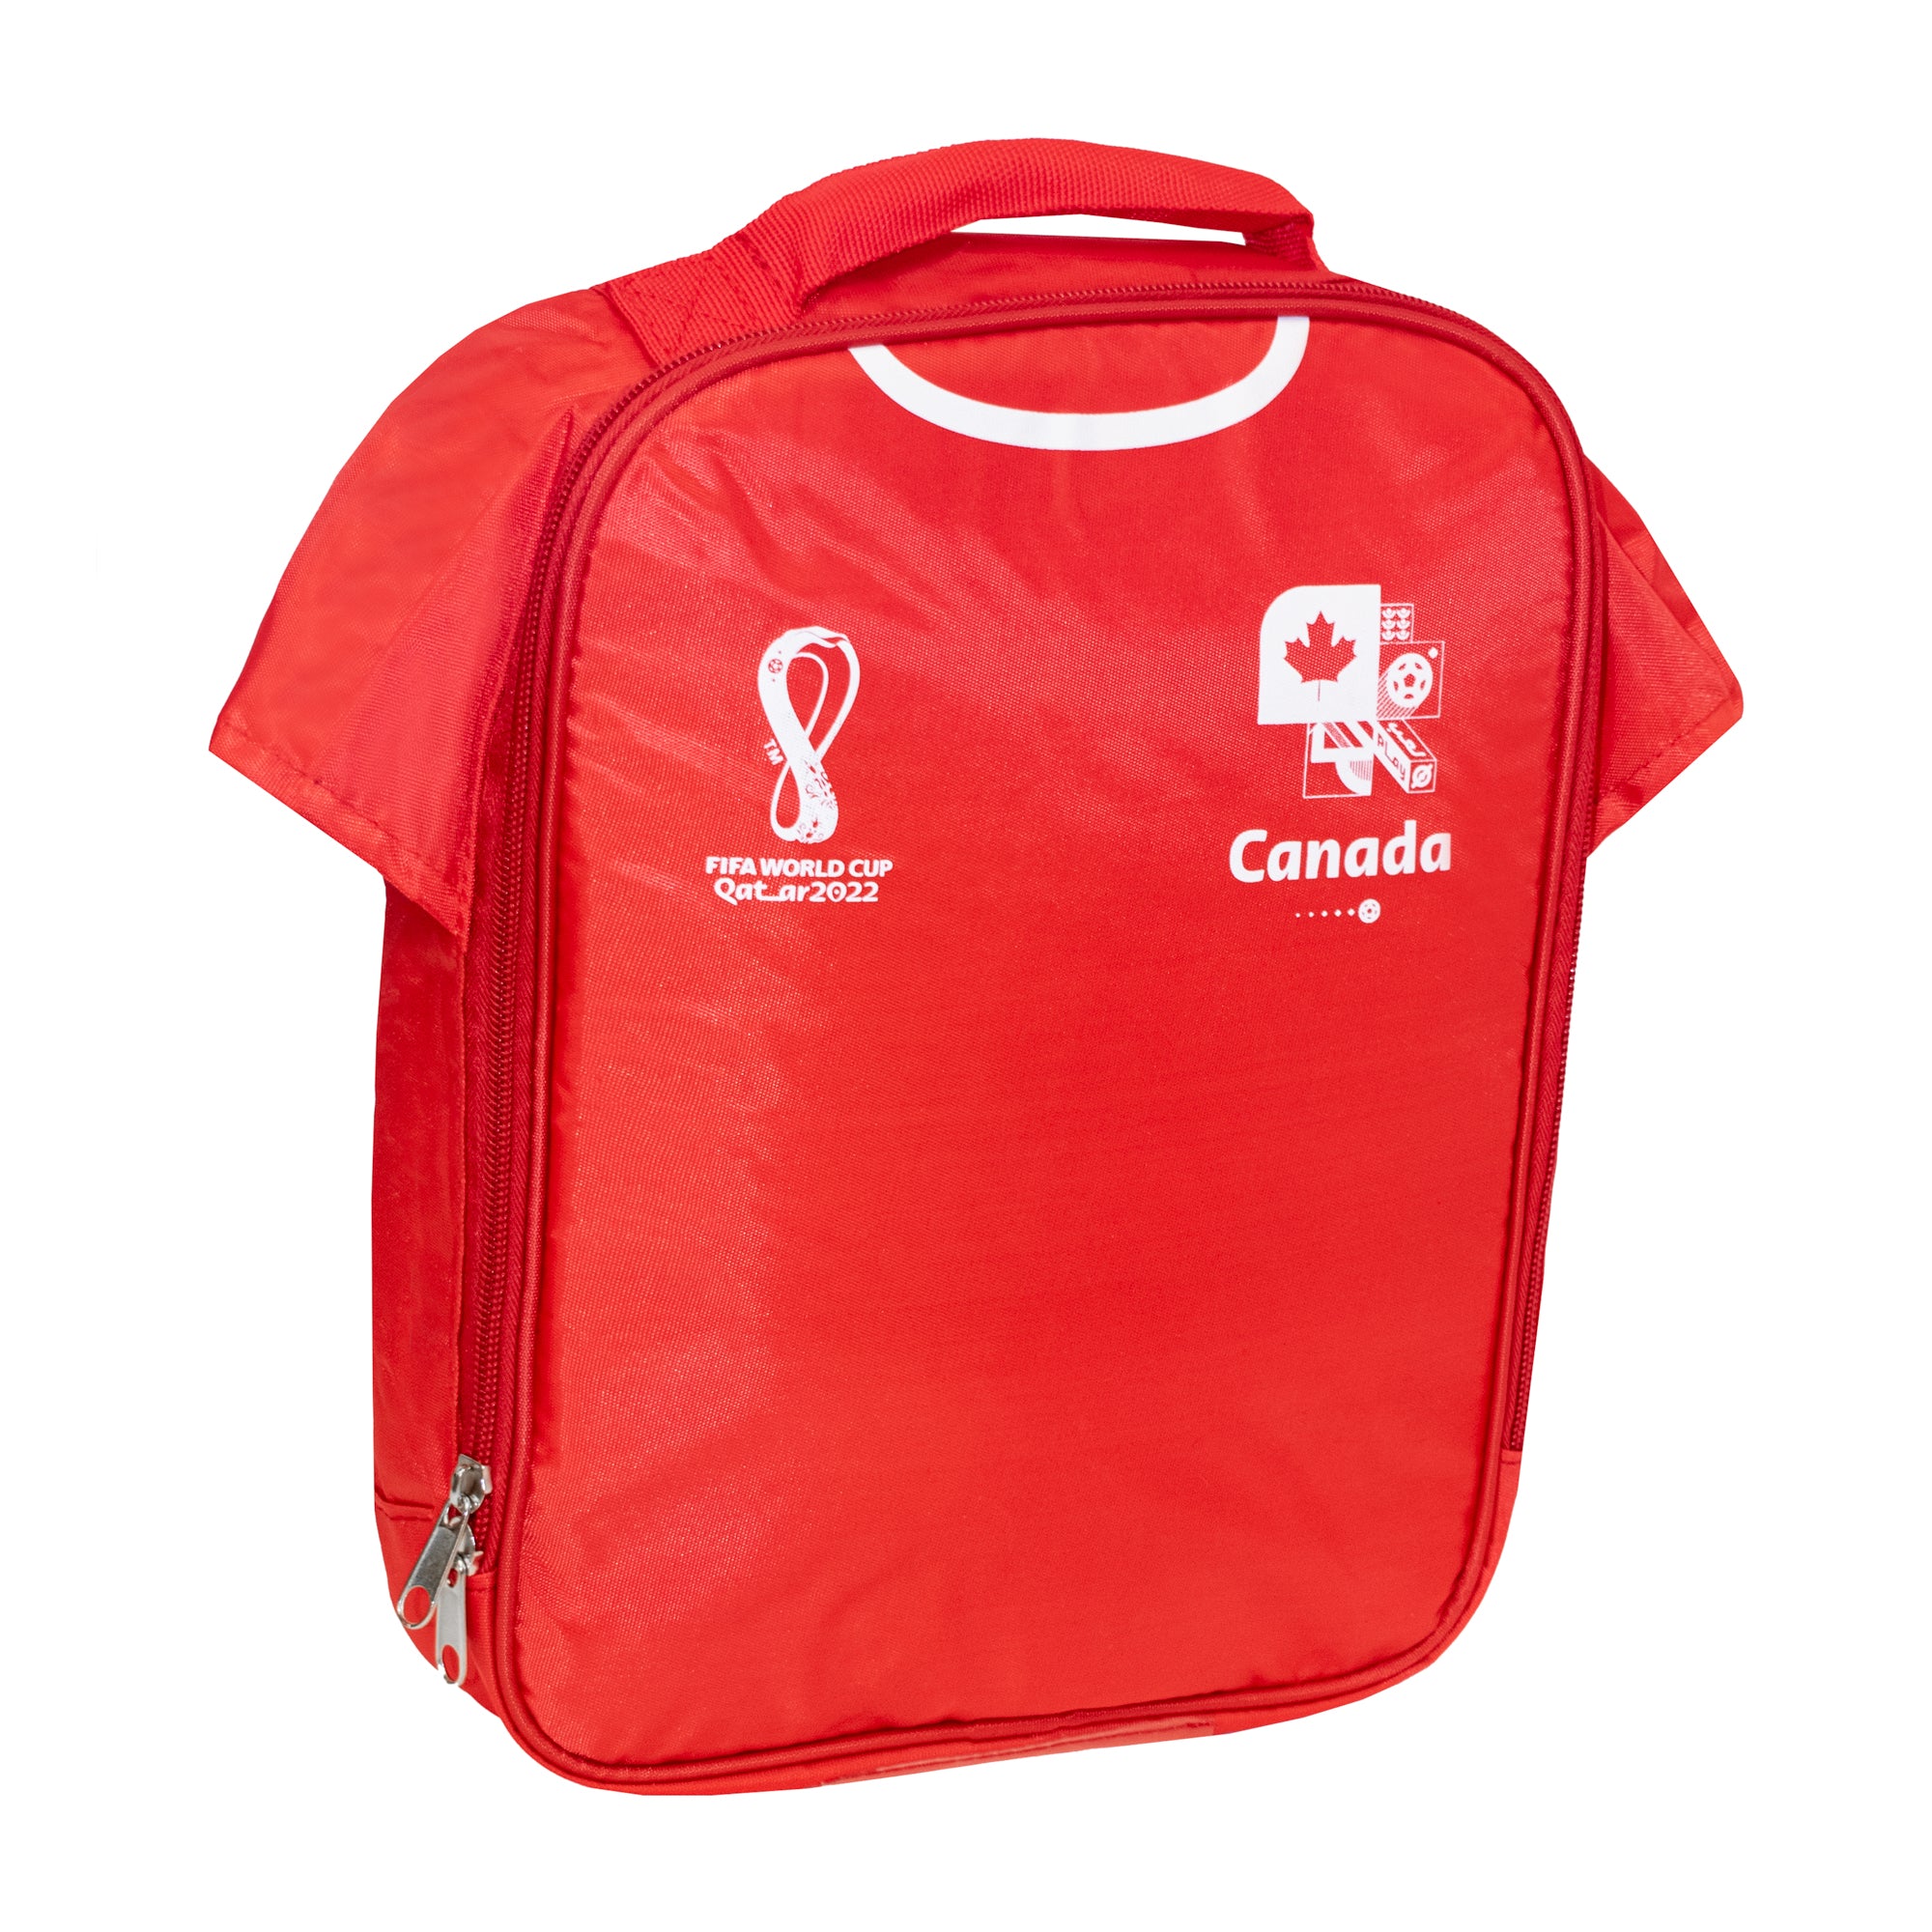 CANADA – FIFA WORLD CUP 2022 LUNCH BAG/COOLER